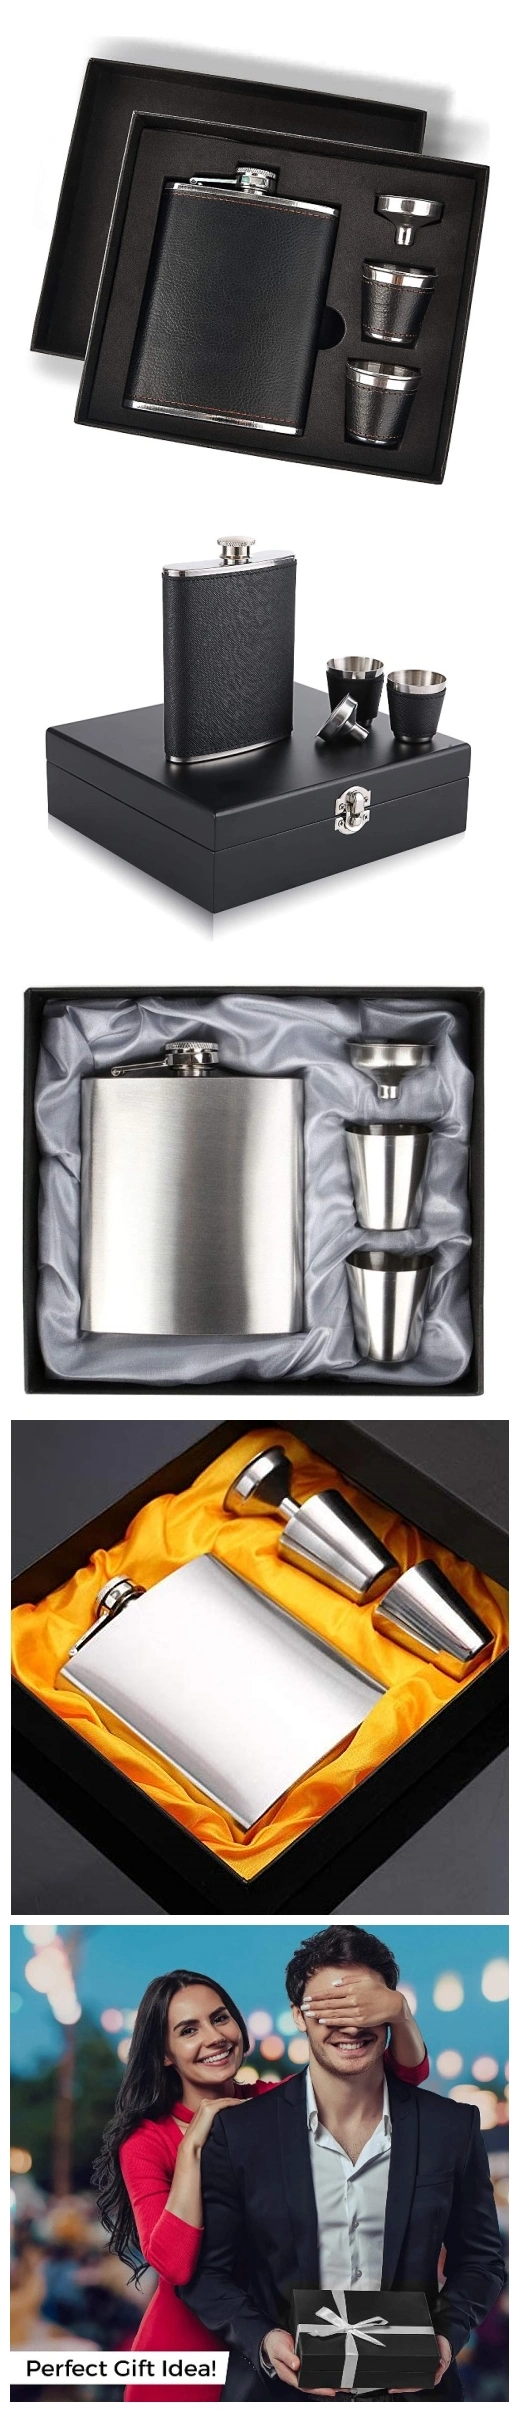 Amazon Hot Sell 7oz Stainless Steel Hip Flask Gift Set with Cups and Funnel